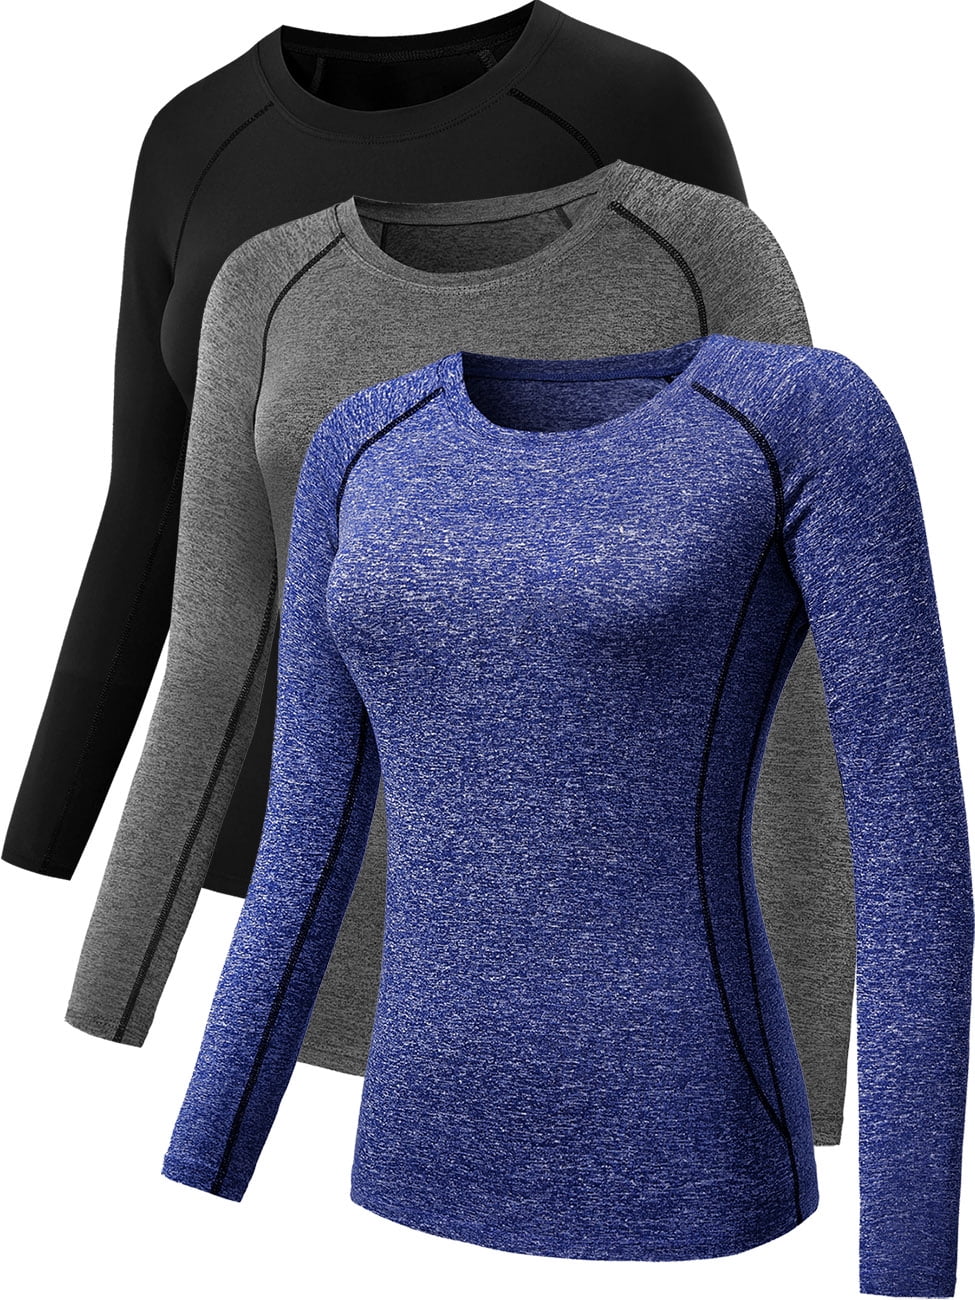 Ullnoy Long Sleeve Workout Tops for Women Dry Fit Yoga Athletic